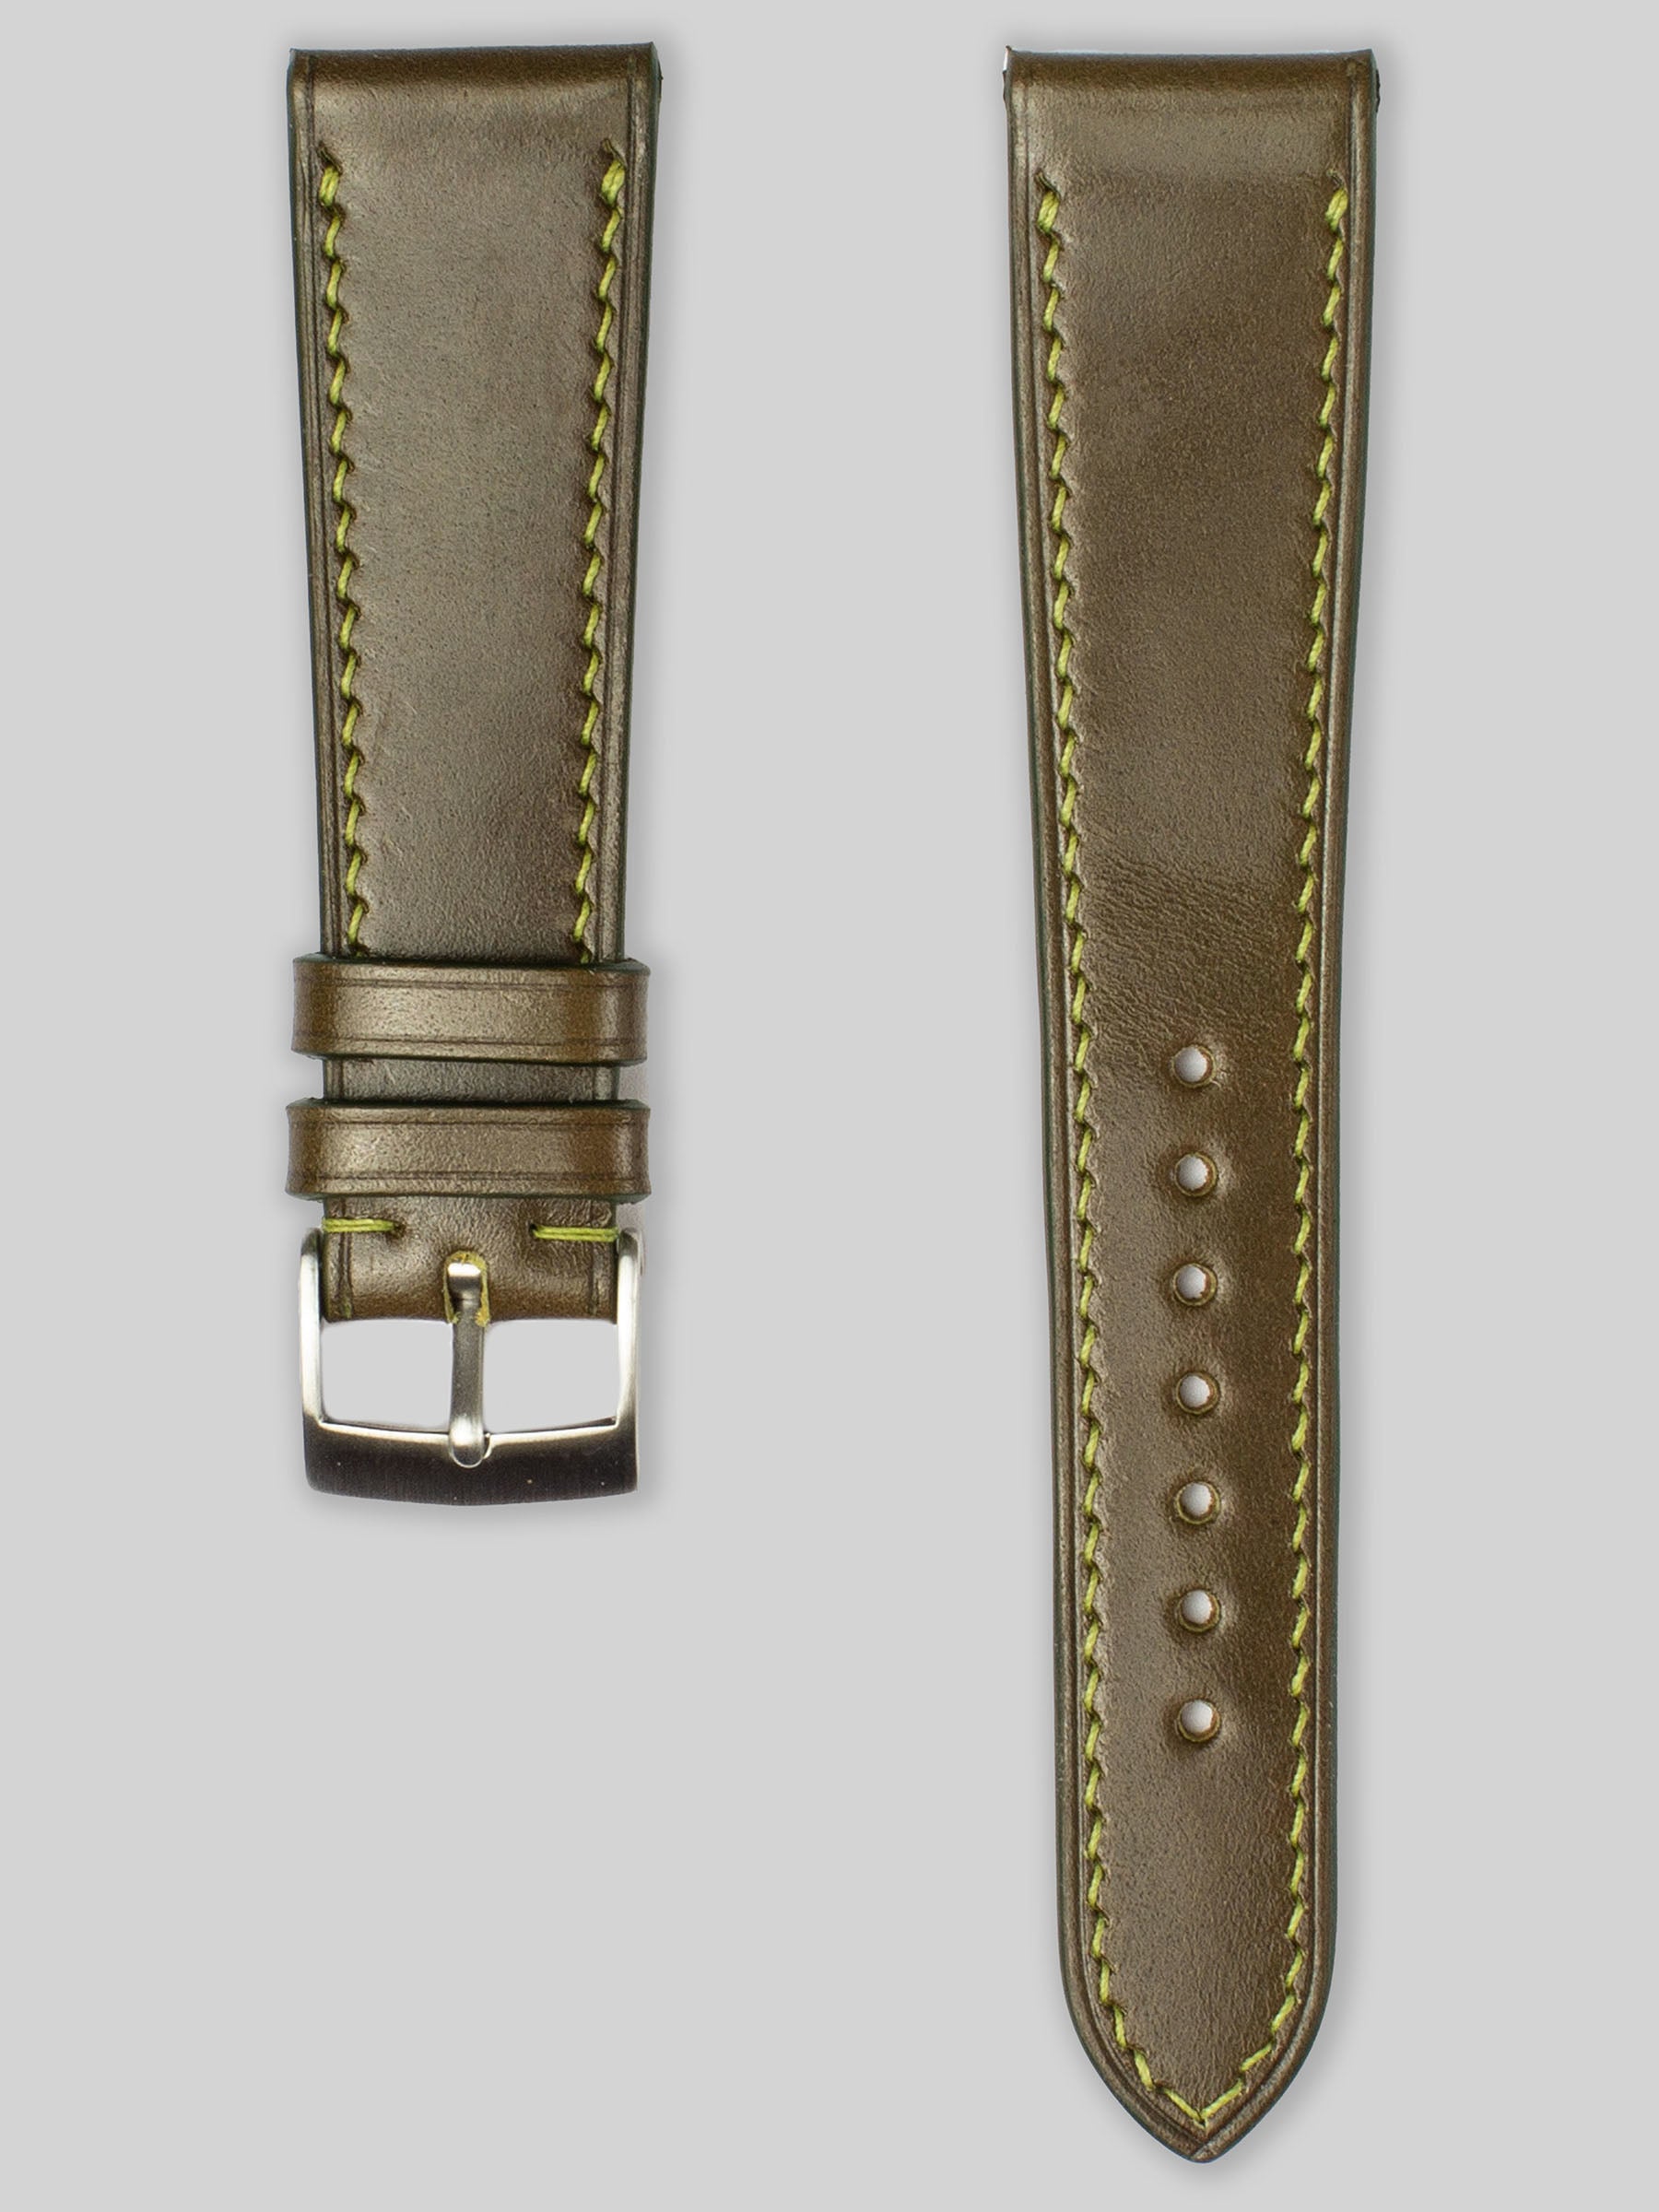 Shell Cordovan Leather Watch Strap - Olive